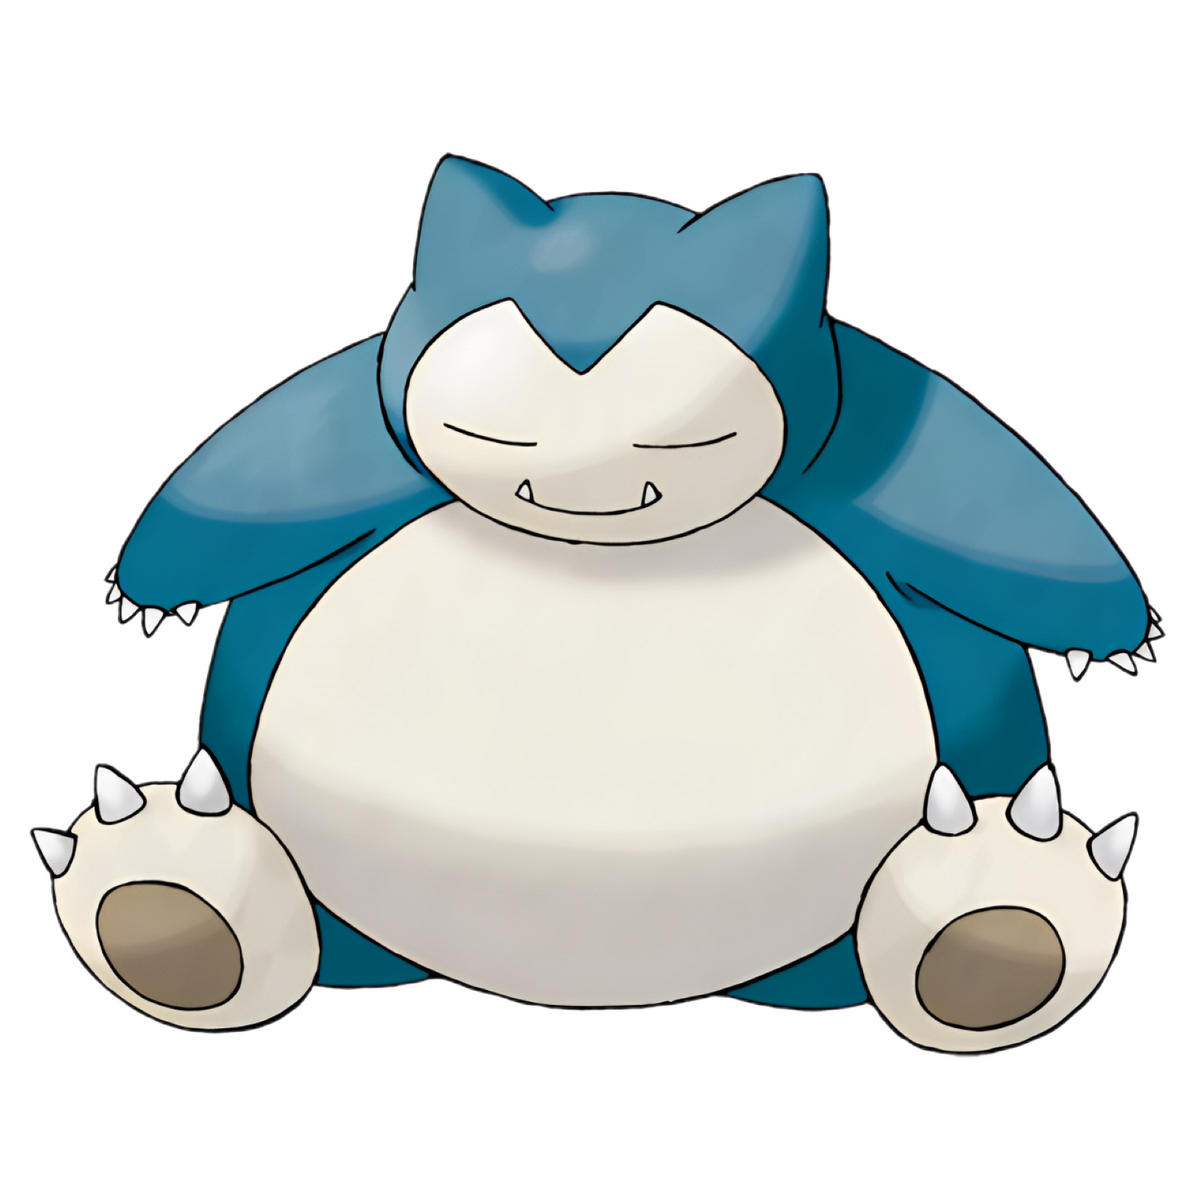 How to draw Snorlax | Pokemon - Sketchok easy drawing guides